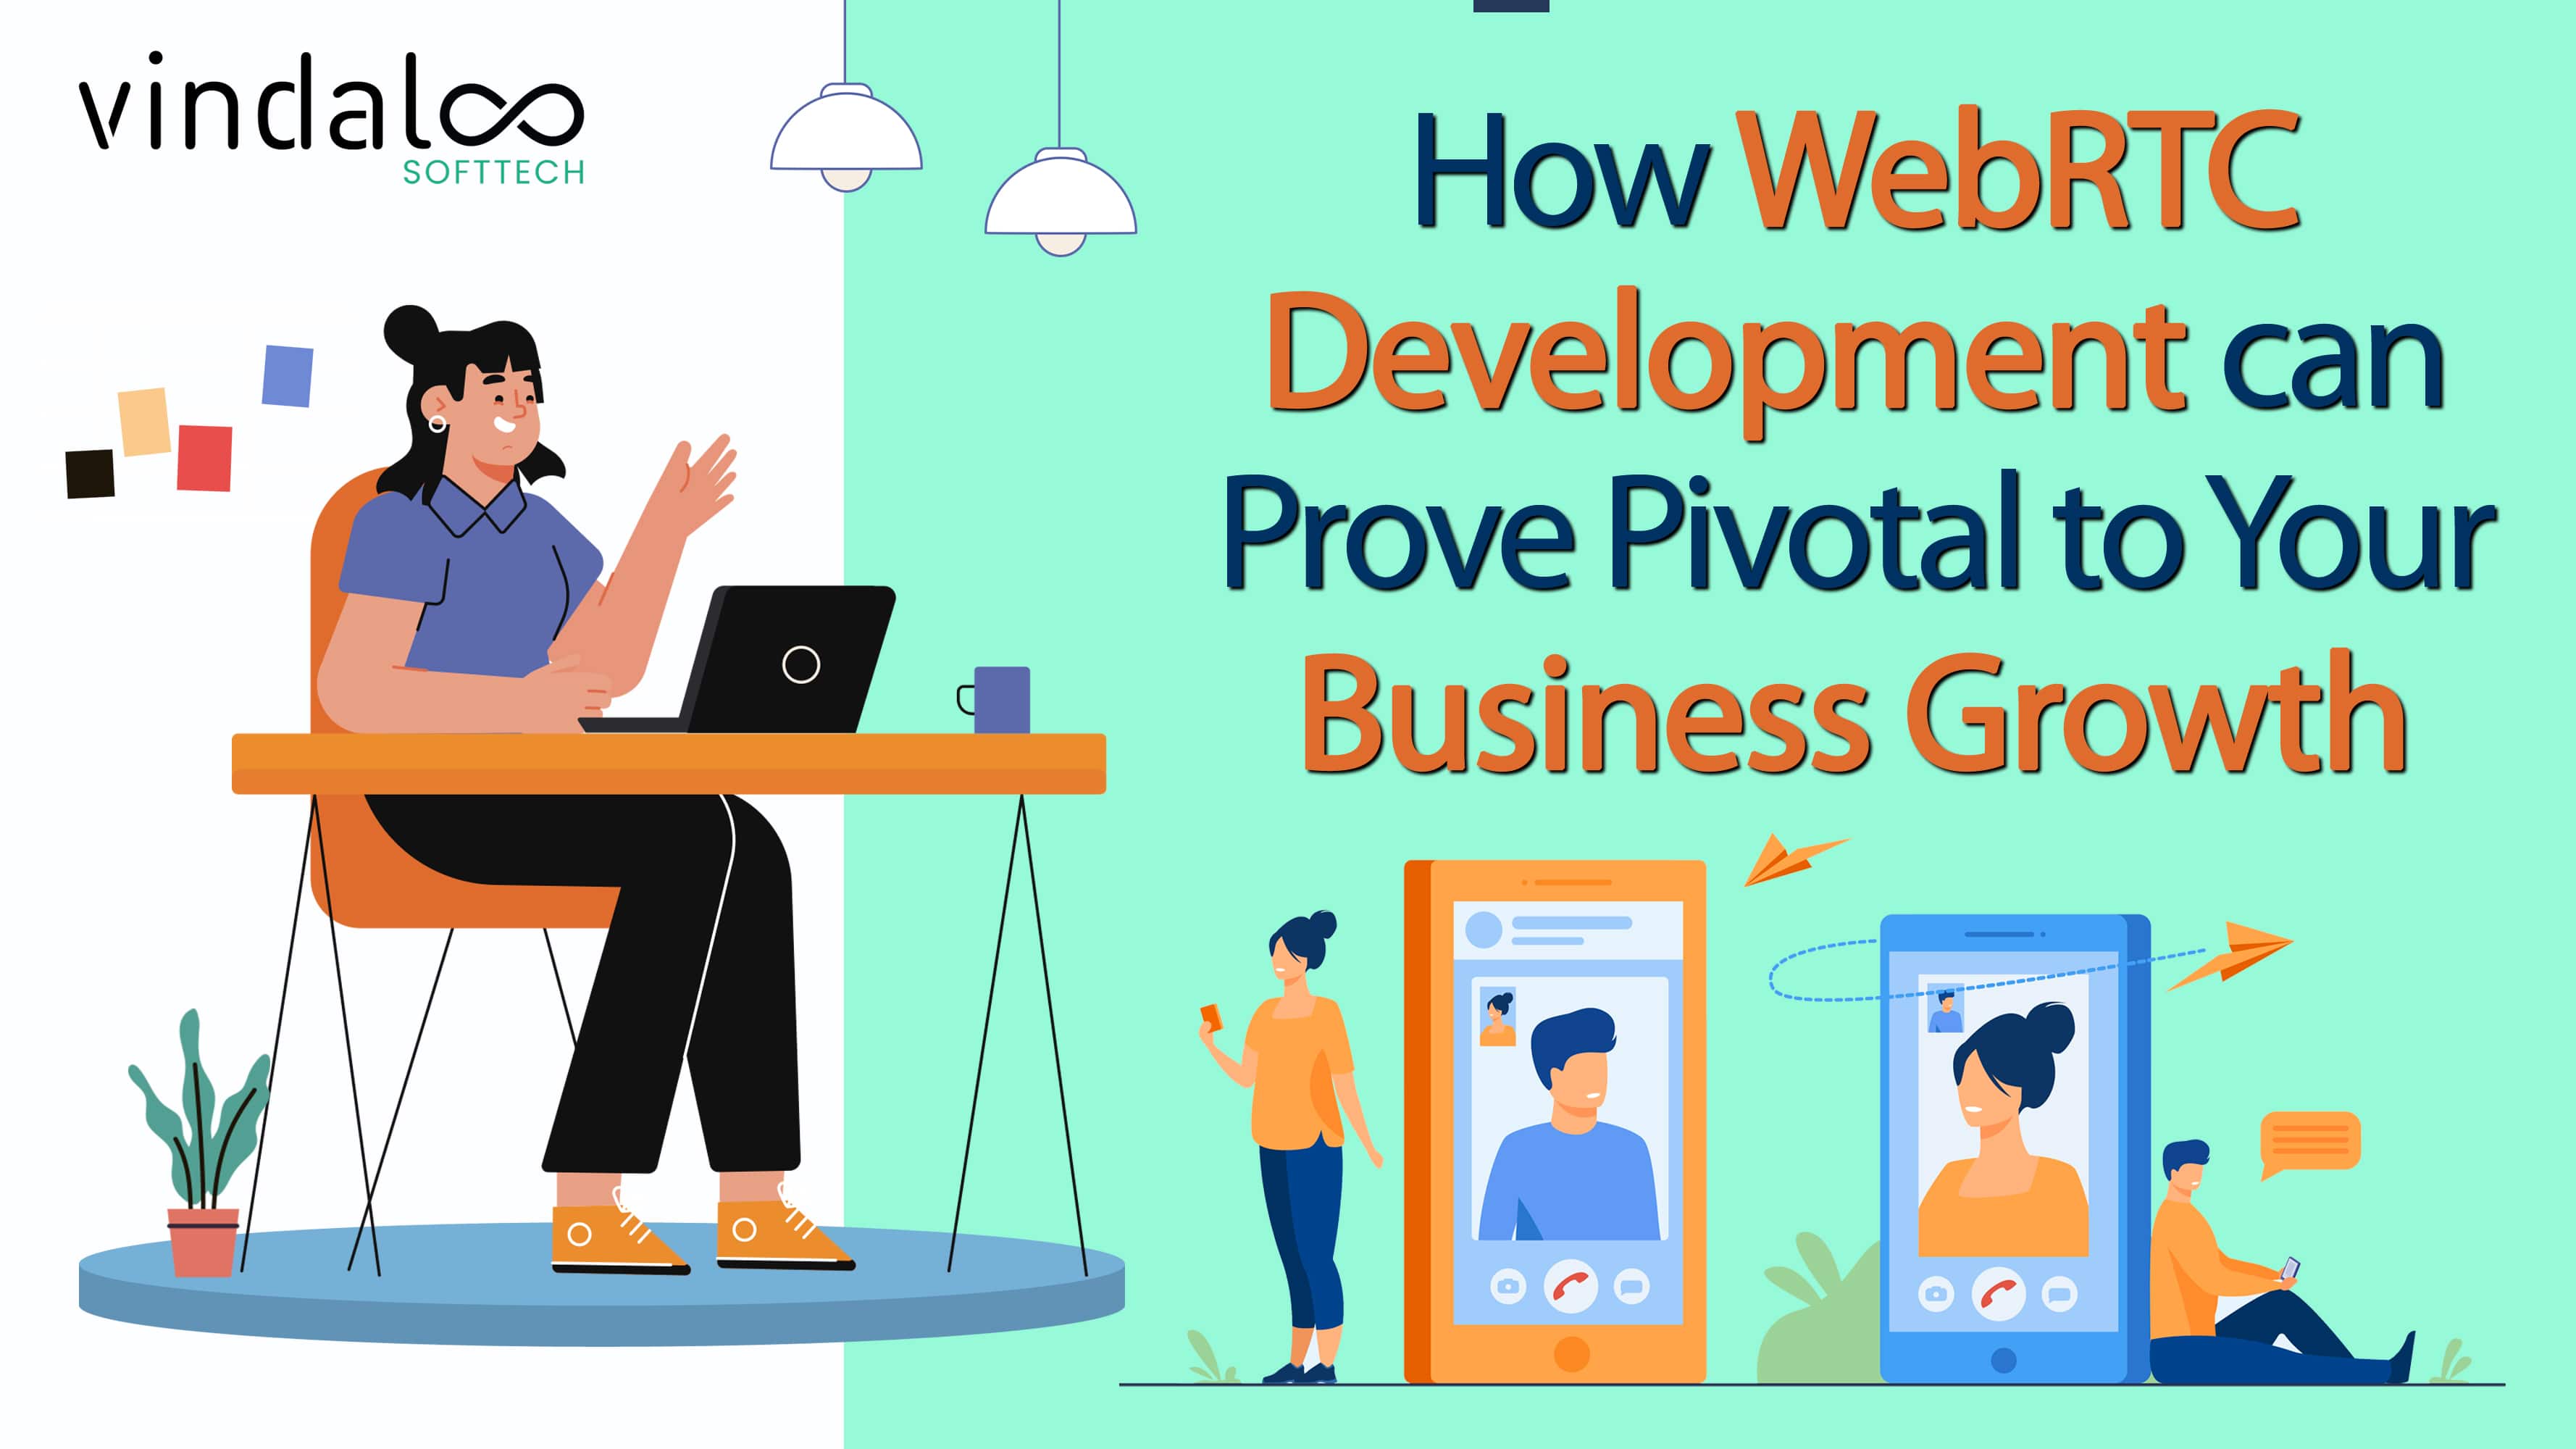 Article about How WebRTC Development can Prove Pivotal to Your Business Growth